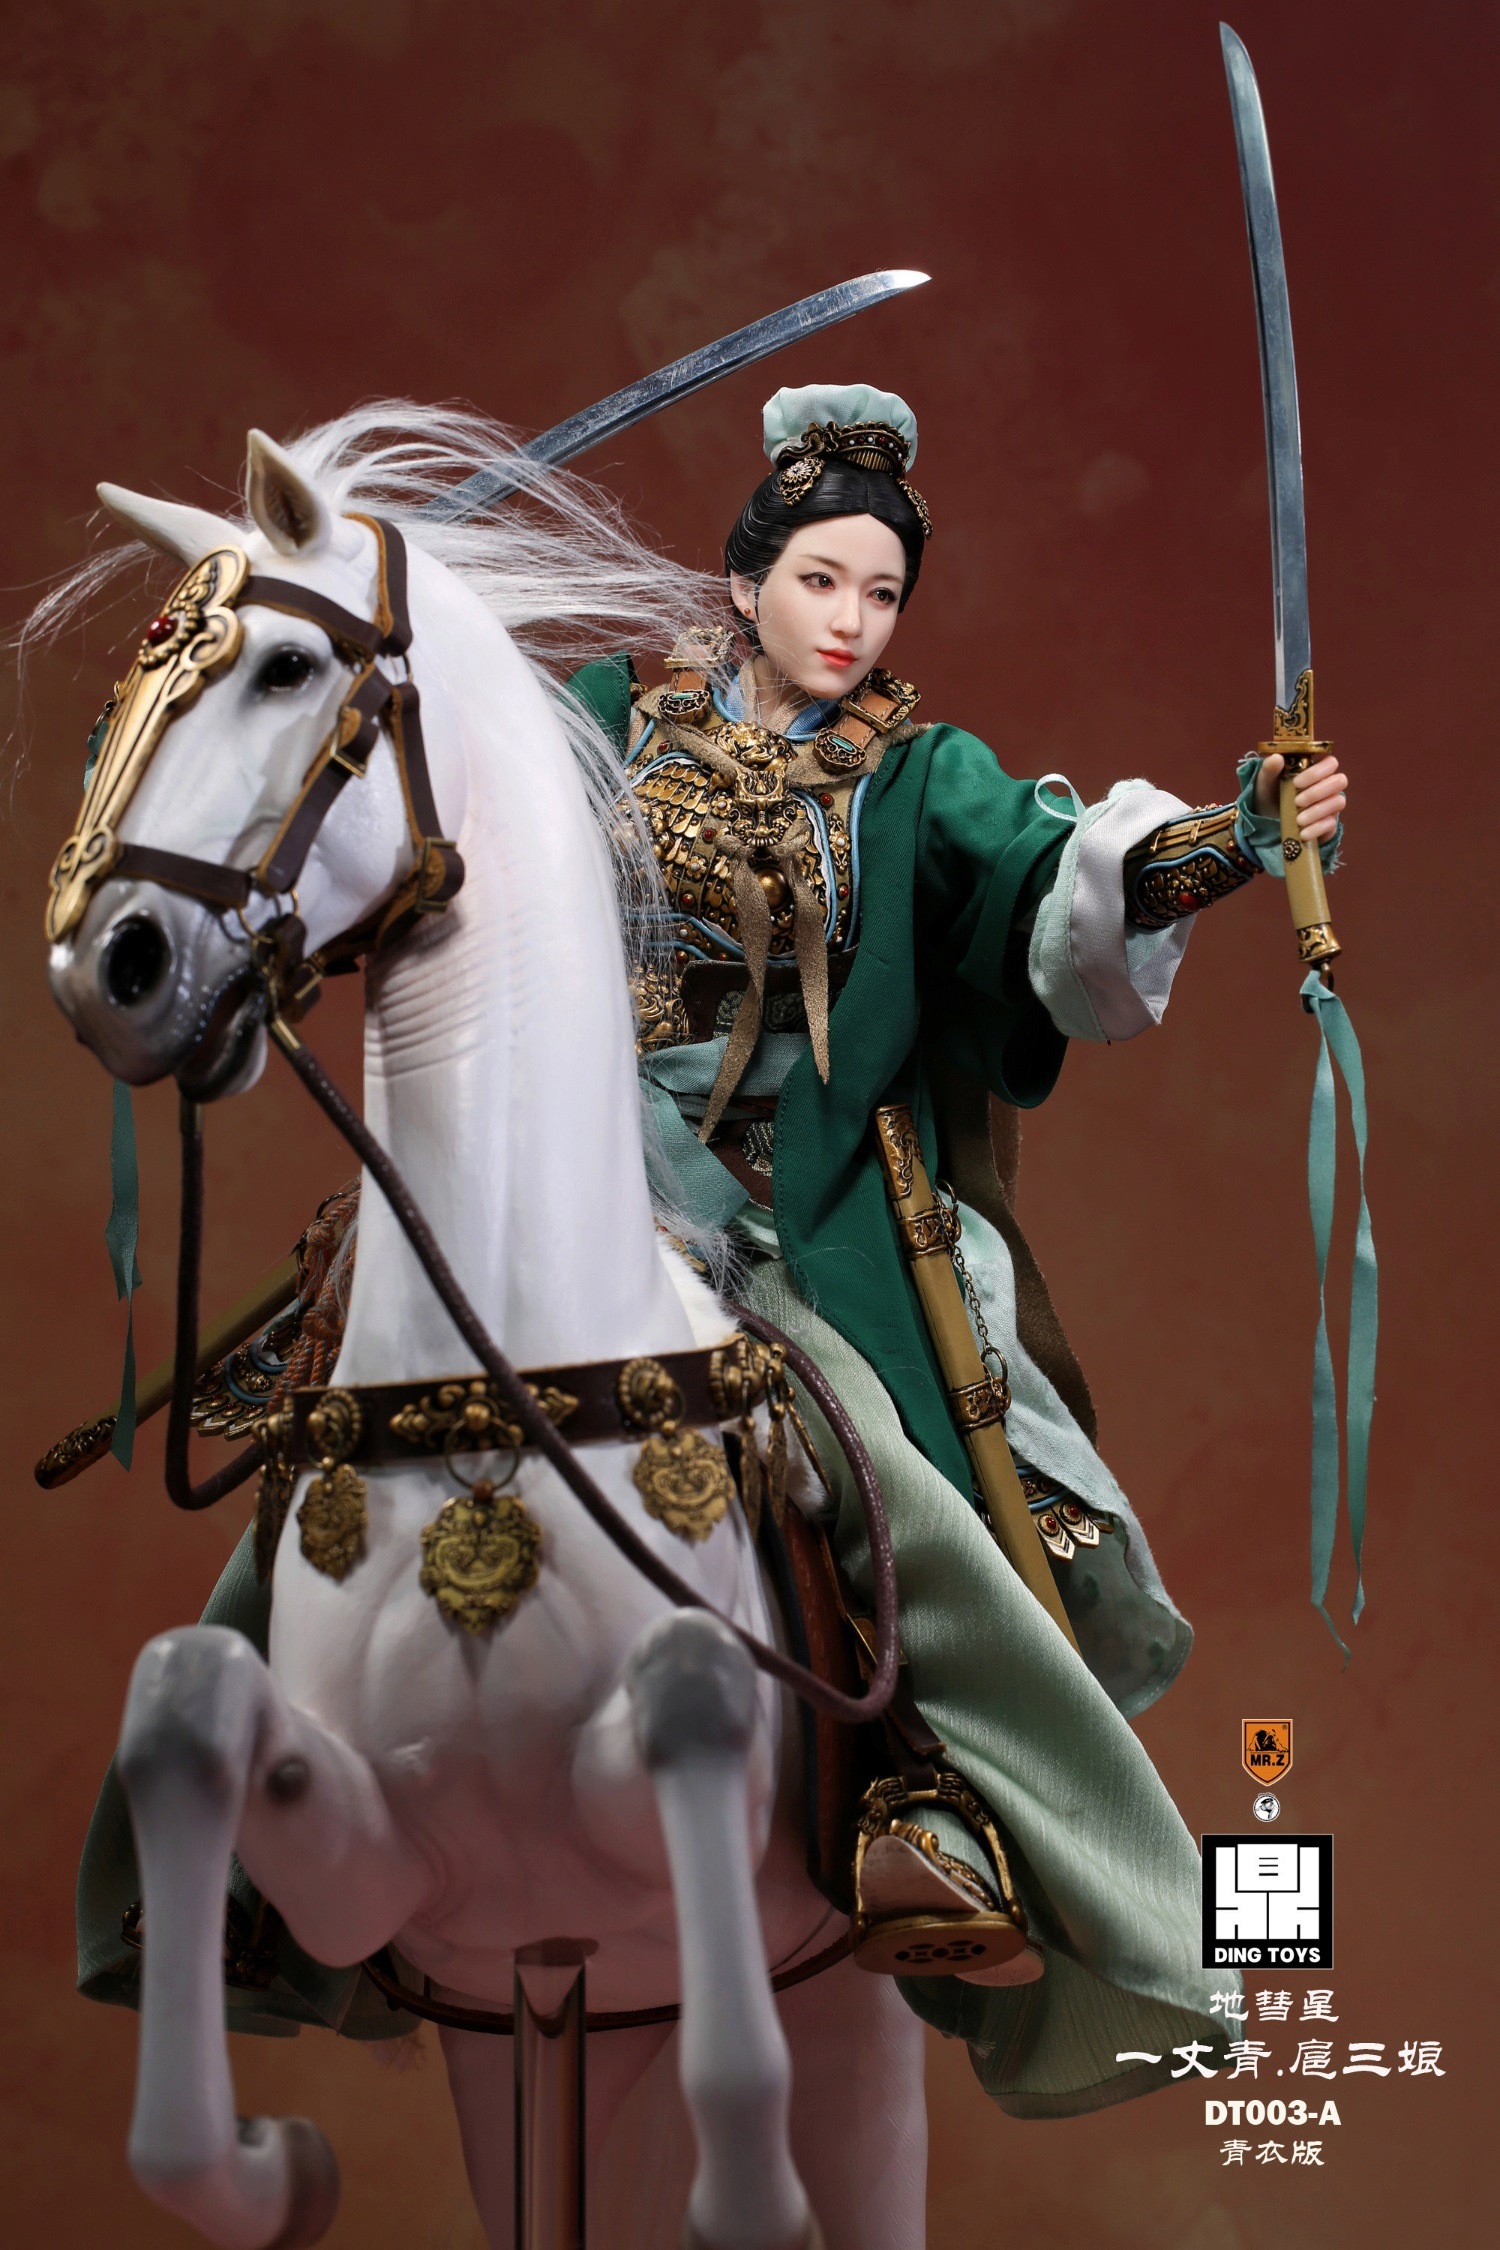 MrZ - NEW PRODUCT: Mr.Z x Ding Toys DT003 1/6 Scale 《Water Margin》Shiying Zhang (Green and Red versions), Horse (White) 11235